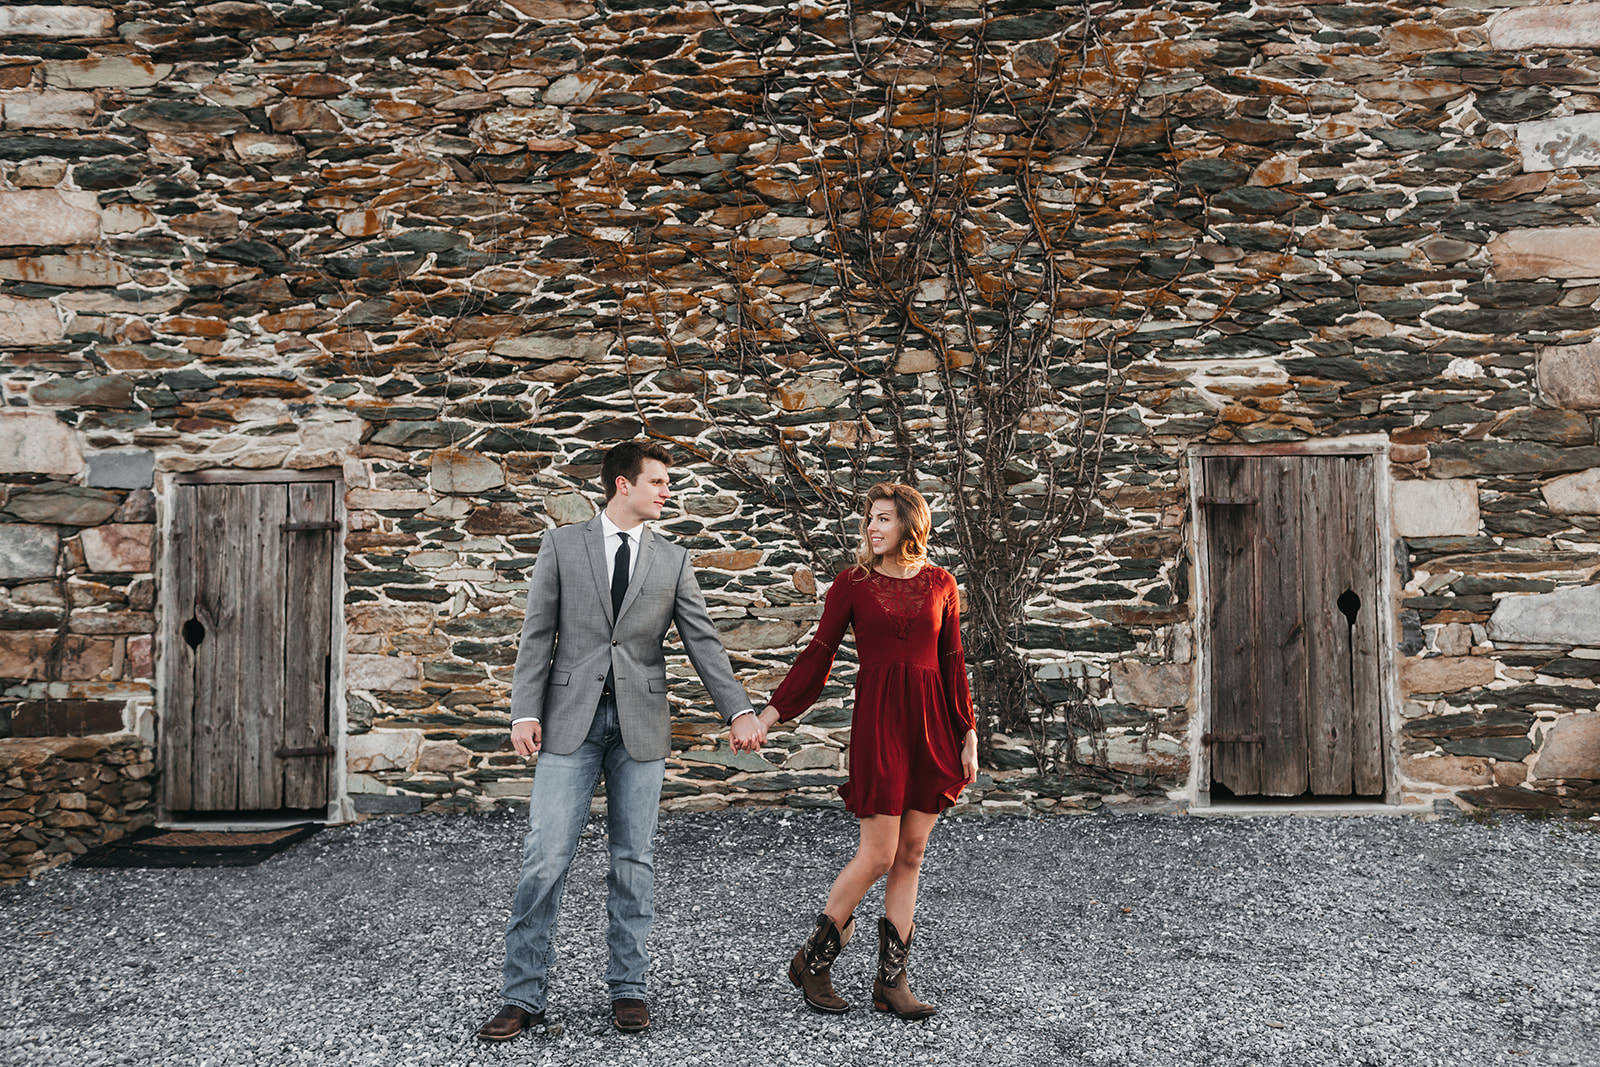 photo of a man and woman in front of a stone wall